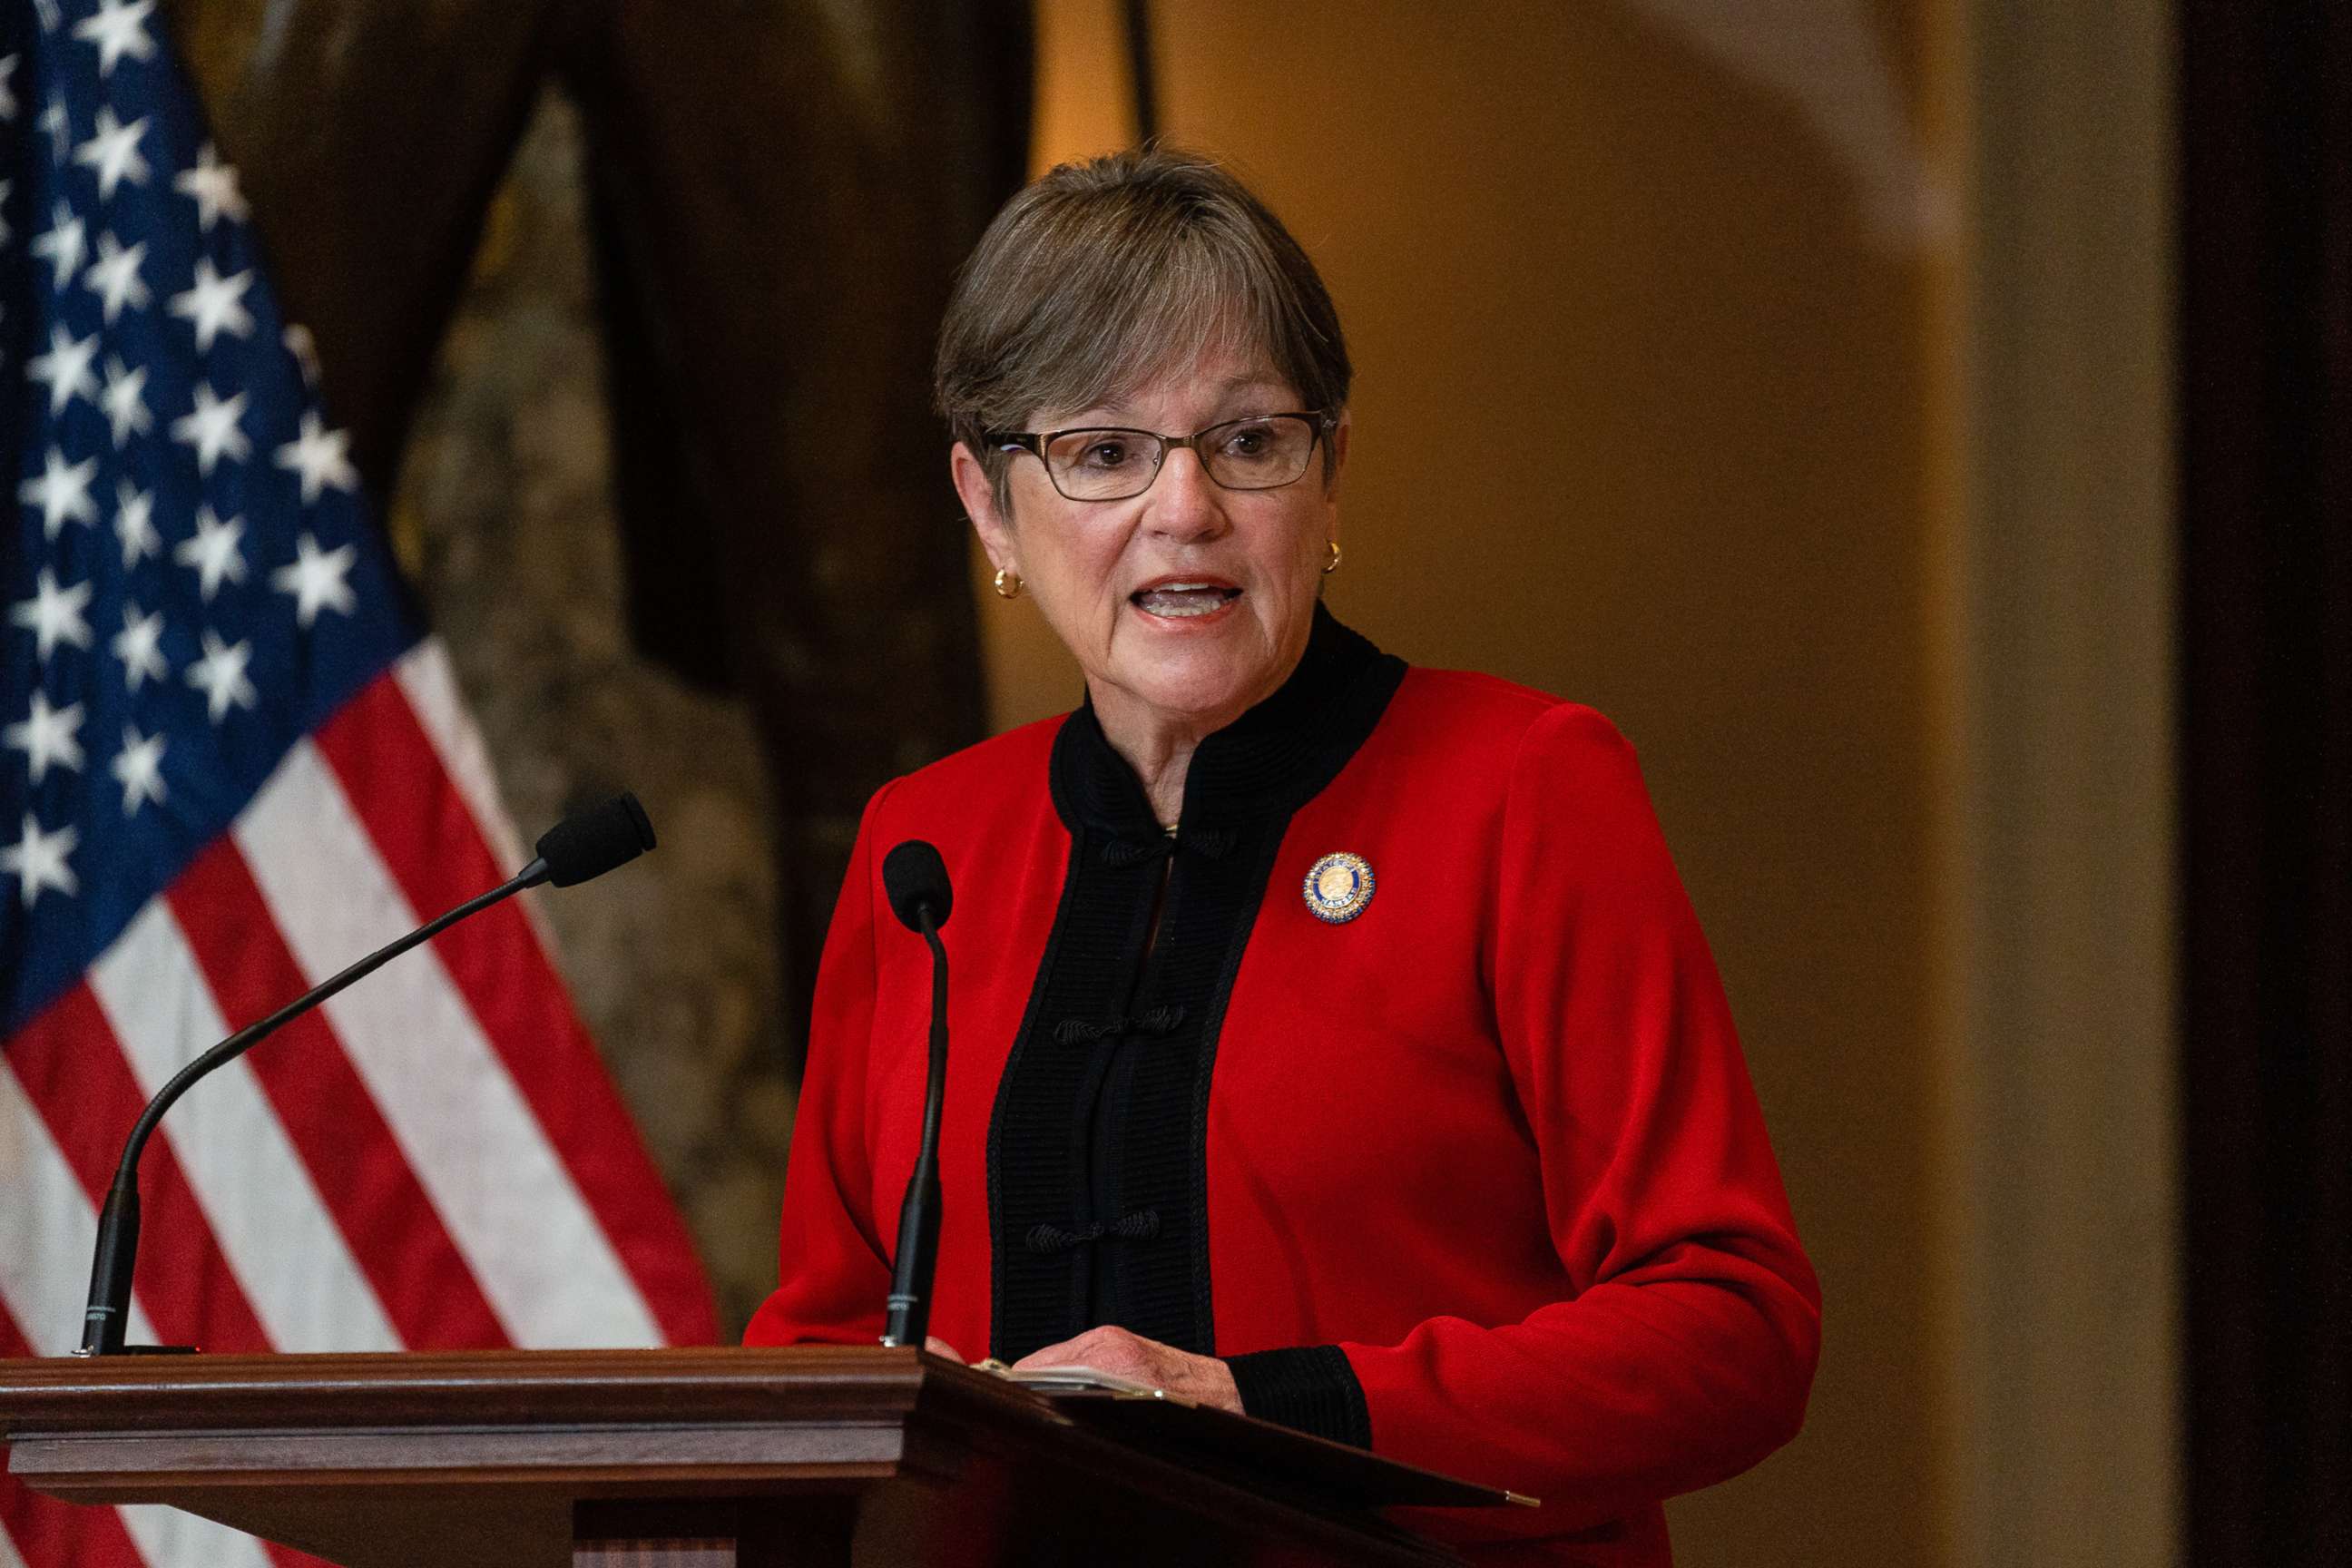 PHOTO: Laura Kelly, governor of Kansas, speaks during a ceremony unveiling a statue of Amelia Earhart in Statuary Hall at the U.S. Capitol in Washington, July 27, 2022.